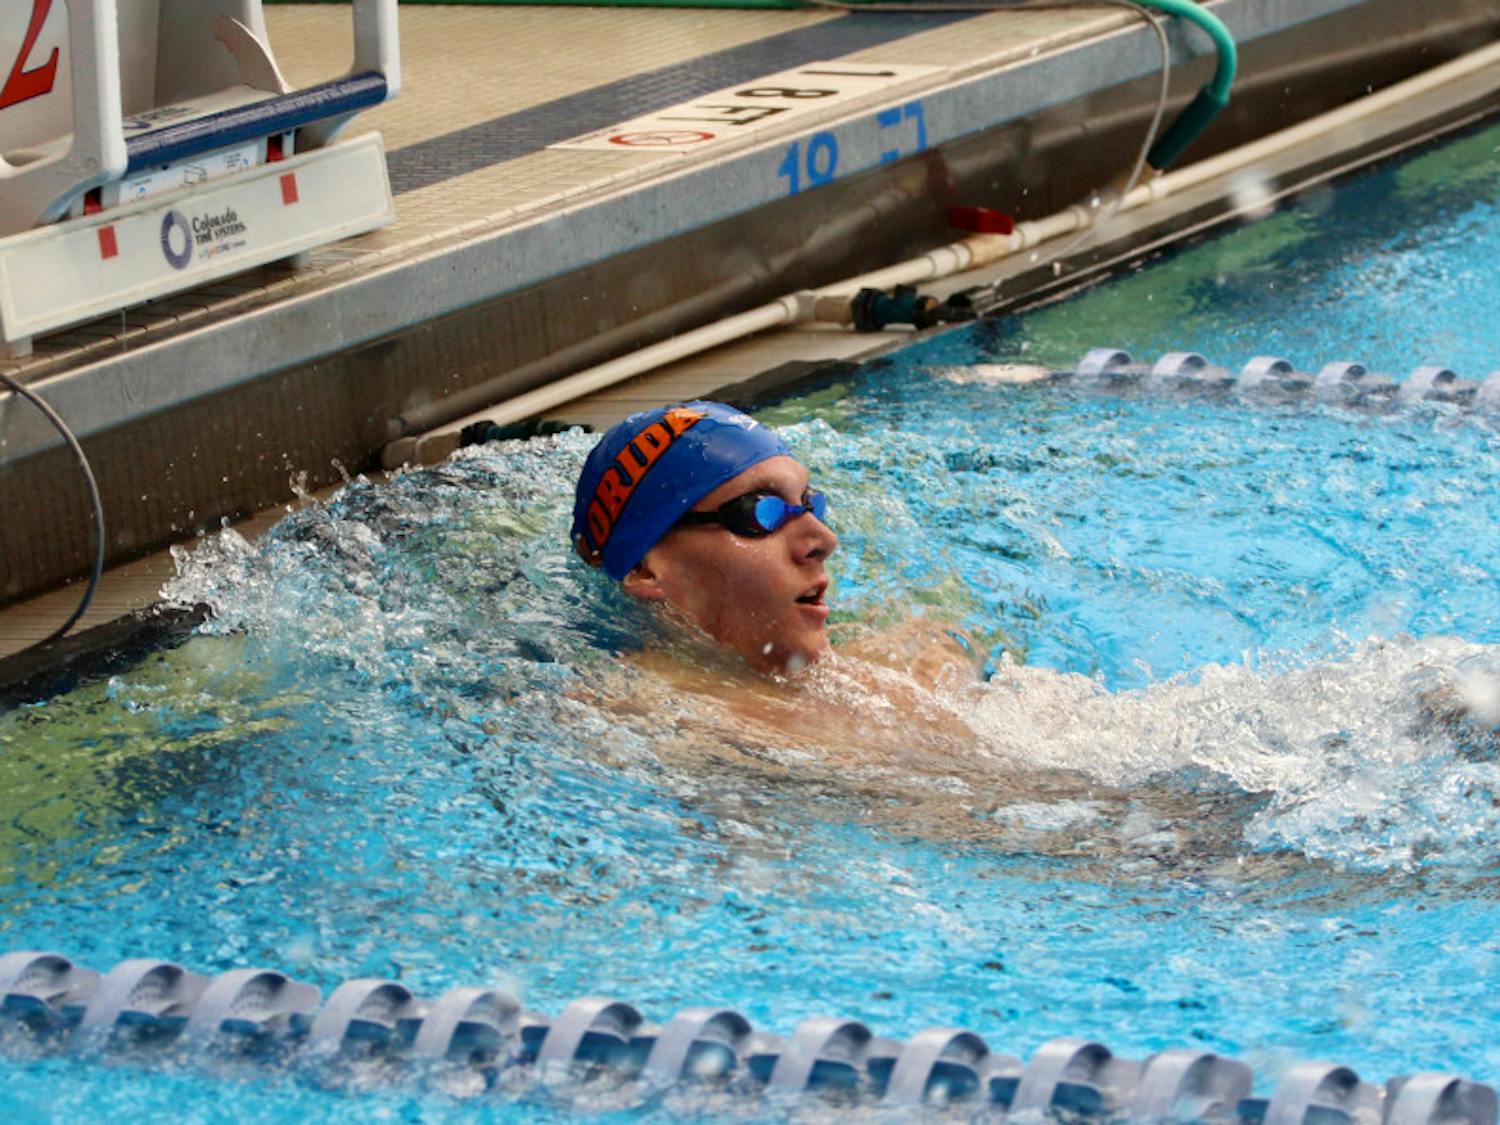 Caeleb Dressel and Jan Switkowski were both part of the winning 200 free relay team, and both were on the second-place 400 medley relay team. Dressel also emerged victorious in the 200 individual medley.